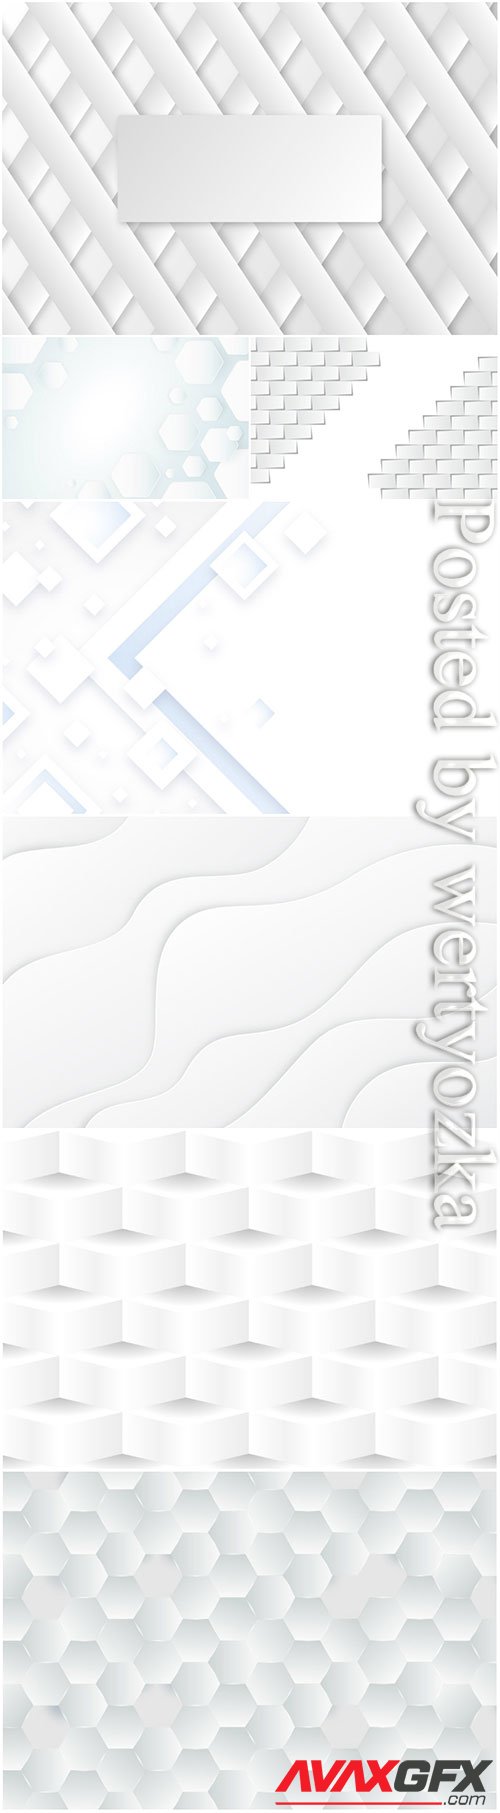 3d background with white abstract vector elements